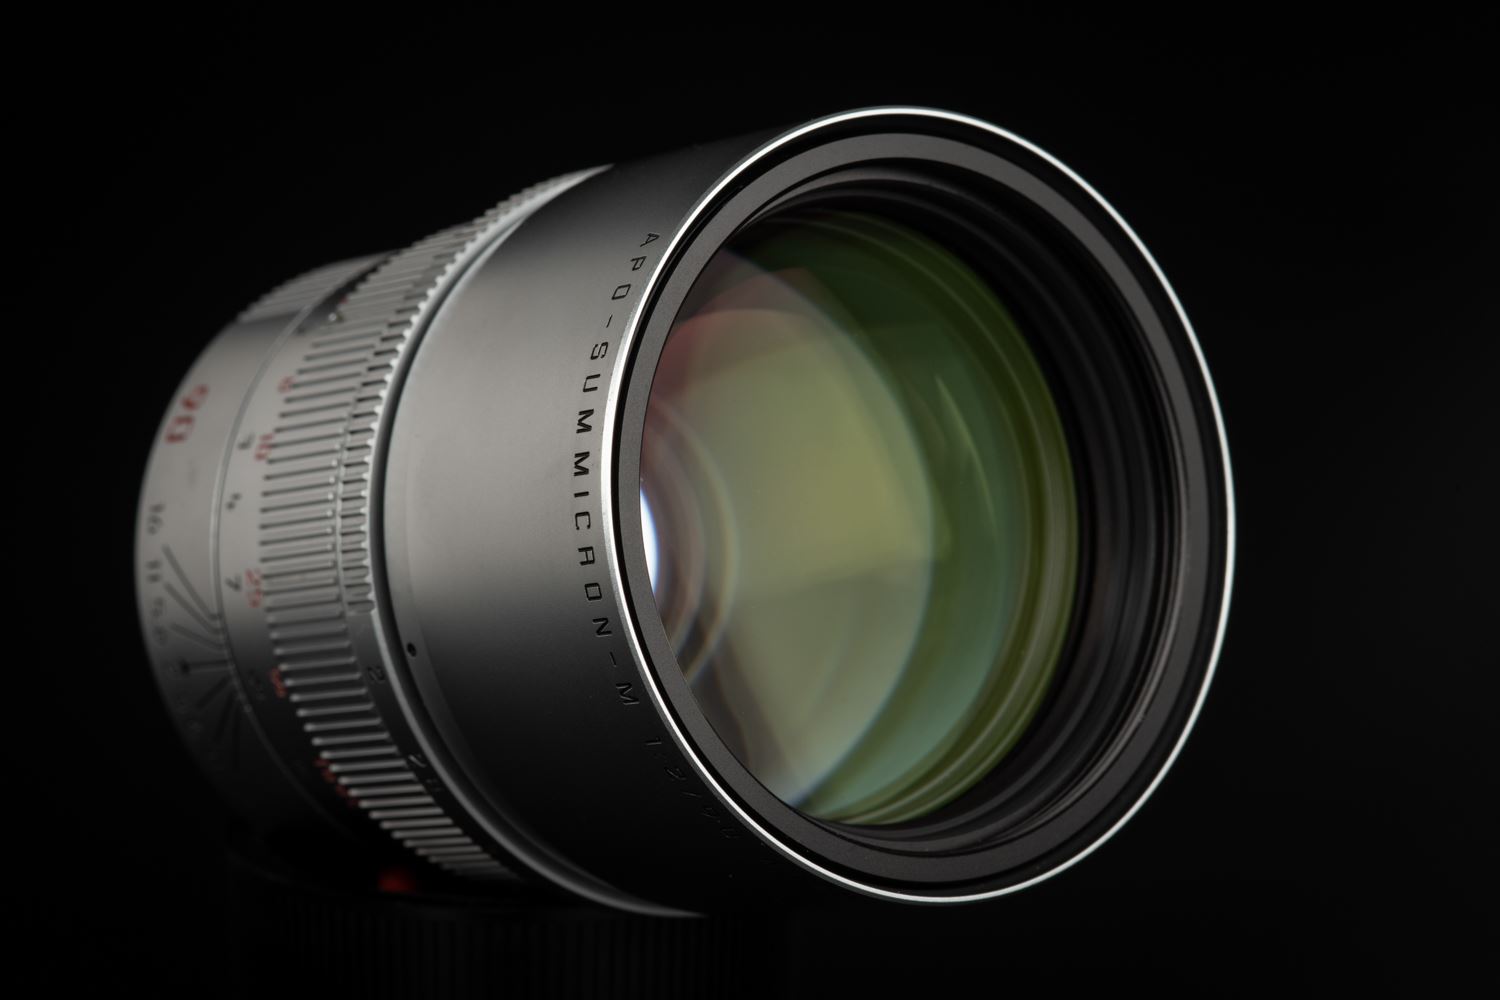 Picture of Leica APO-Summicron-M 90mm f/2 ASPH Silver